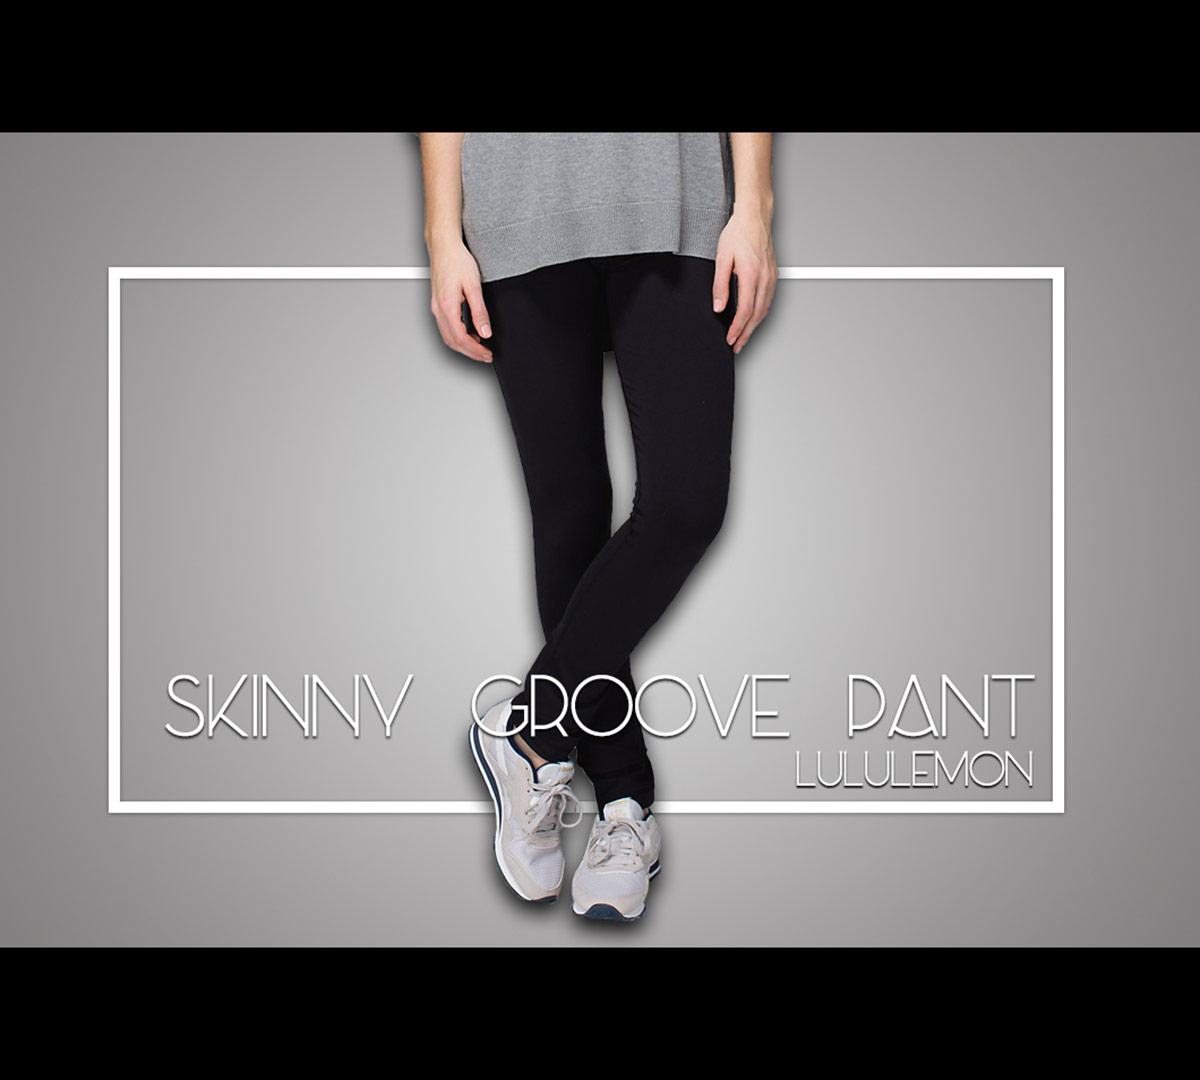 Are Lululemon Skinny Groove Pants Reversible? Let's Find Out! - Playbite